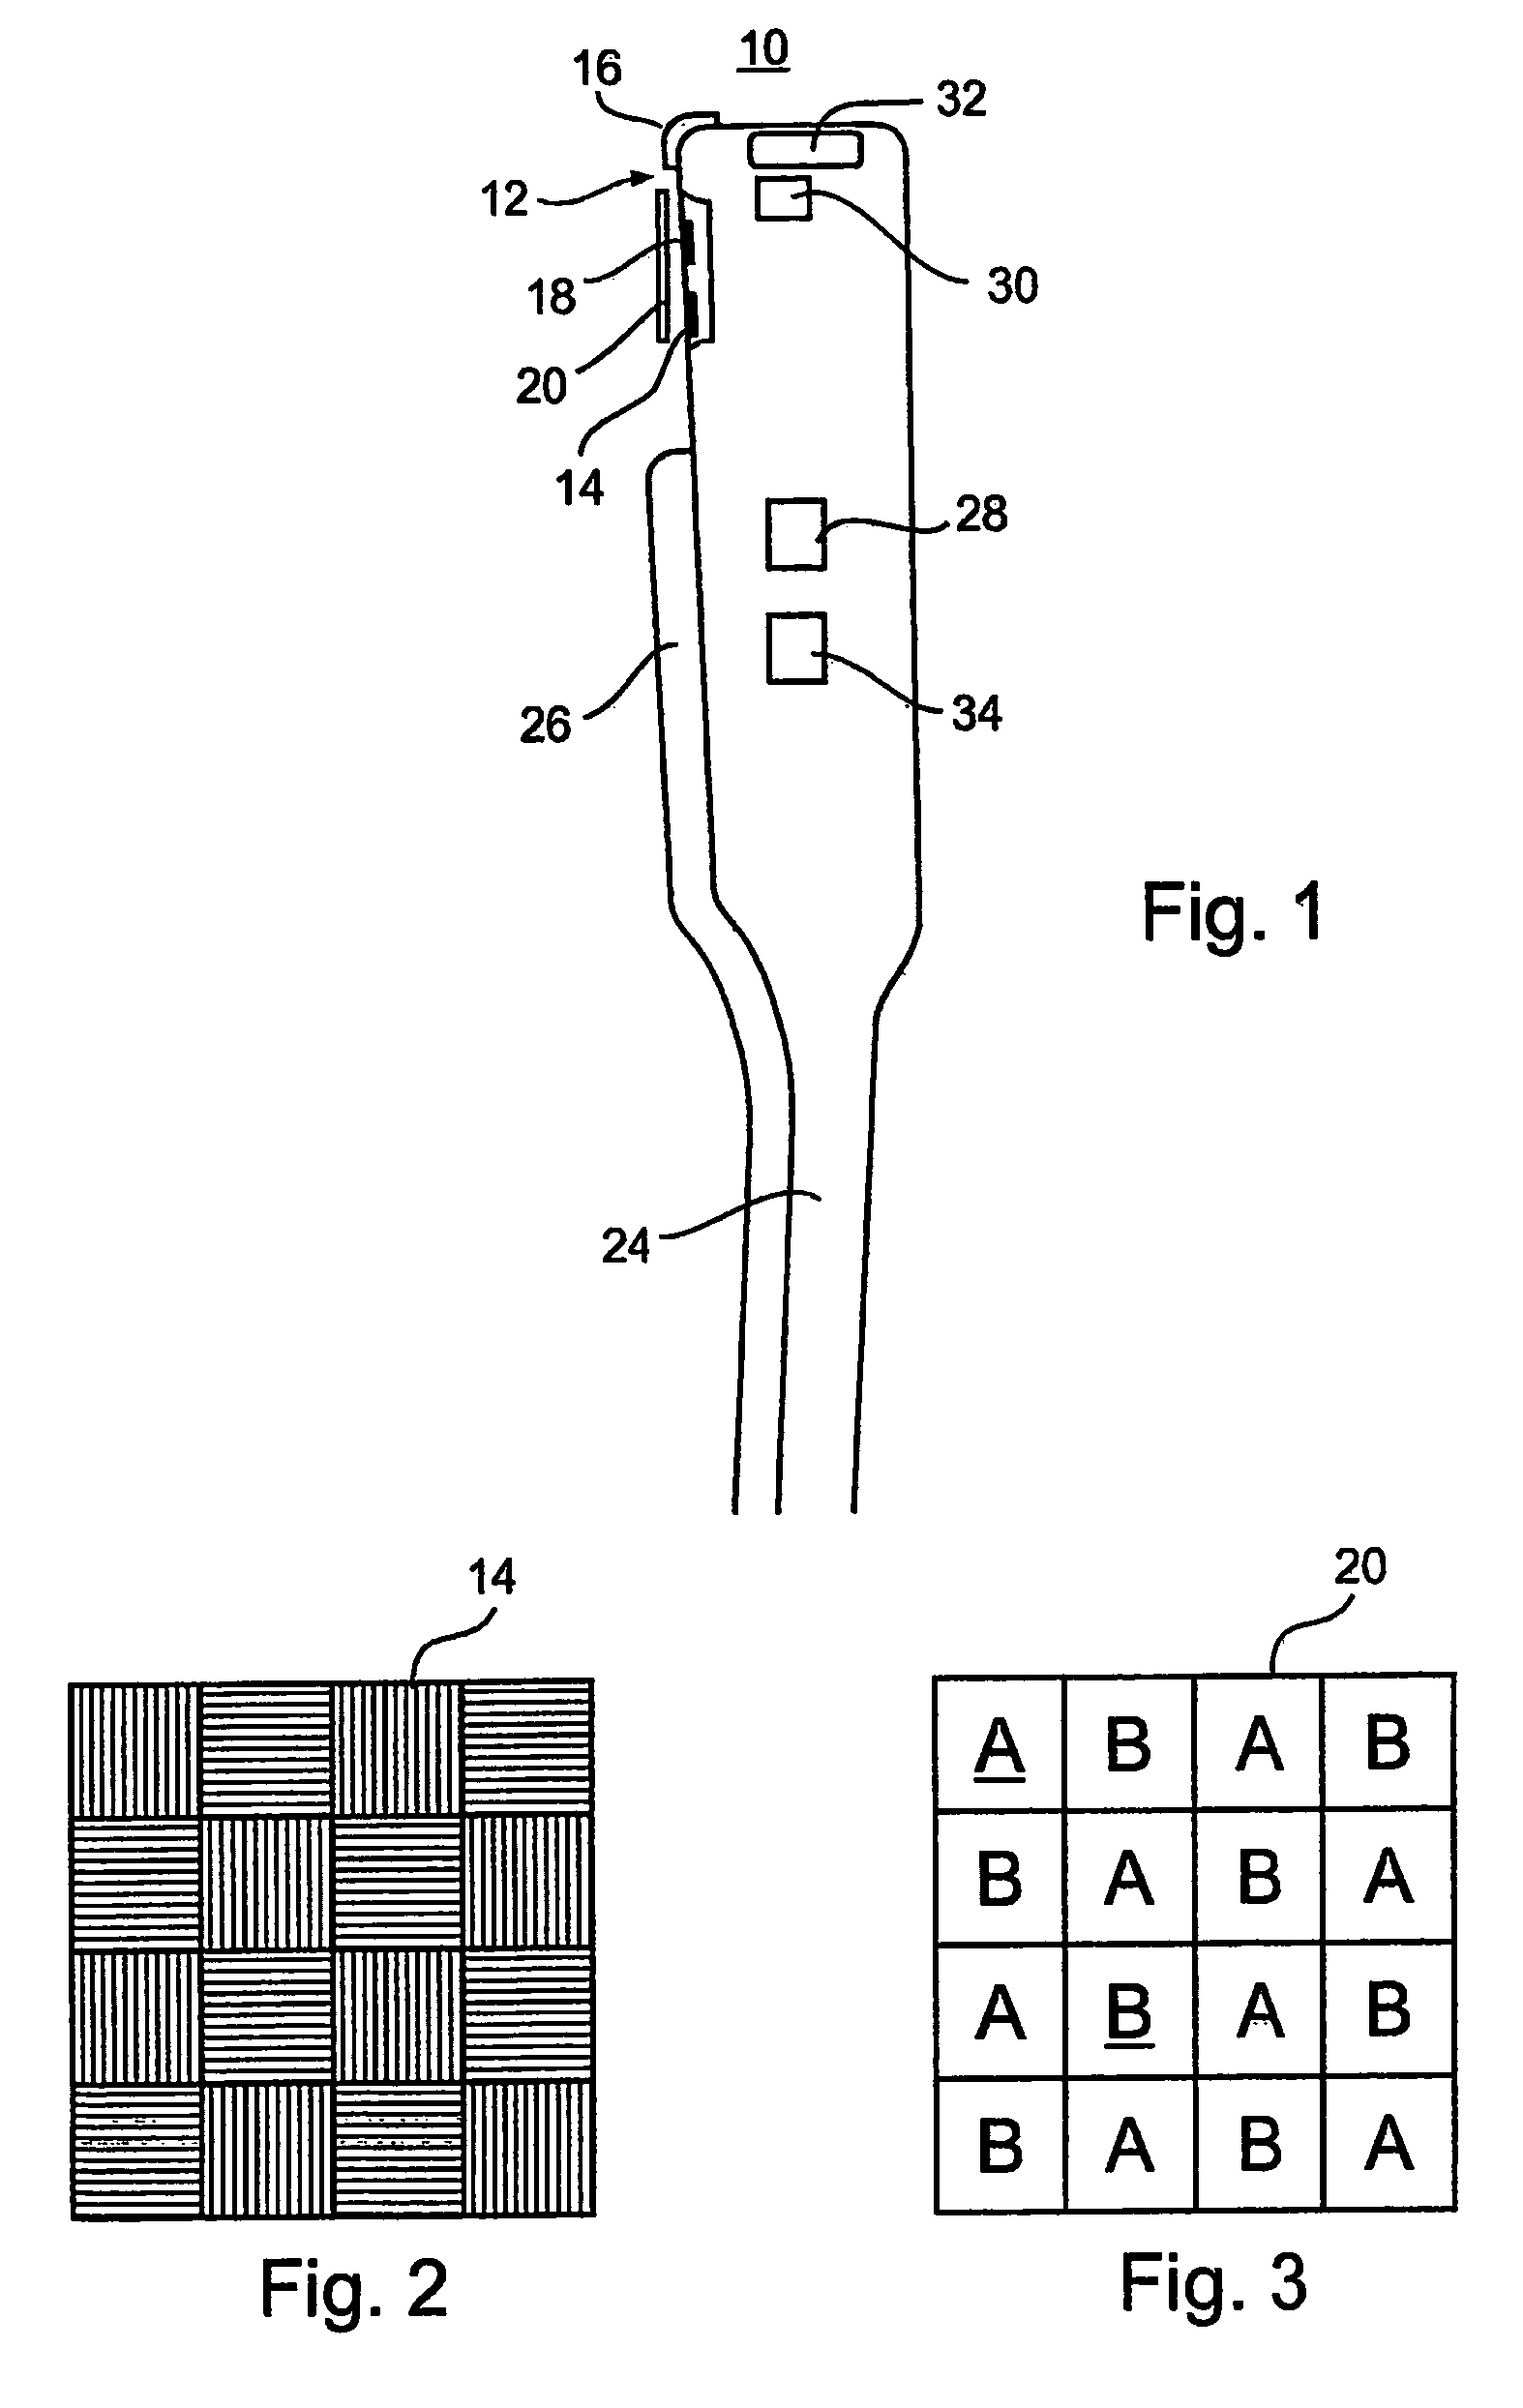 Apparatus, method and system for intravascular photographic imaging